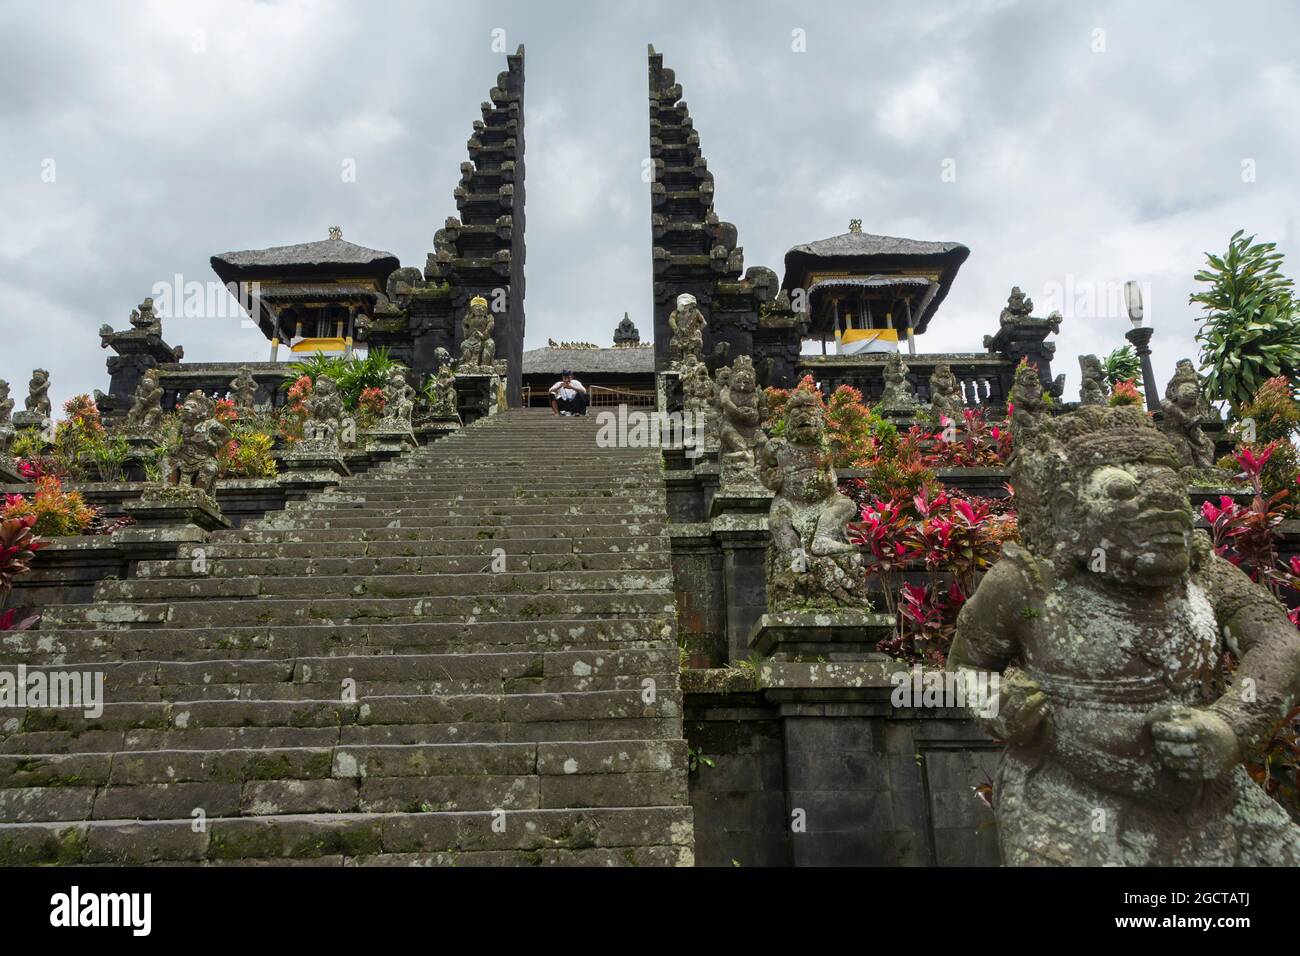 Stairs leading to the entrance of the holy Besakih temple, Bali, Indonesia. Stock Photo